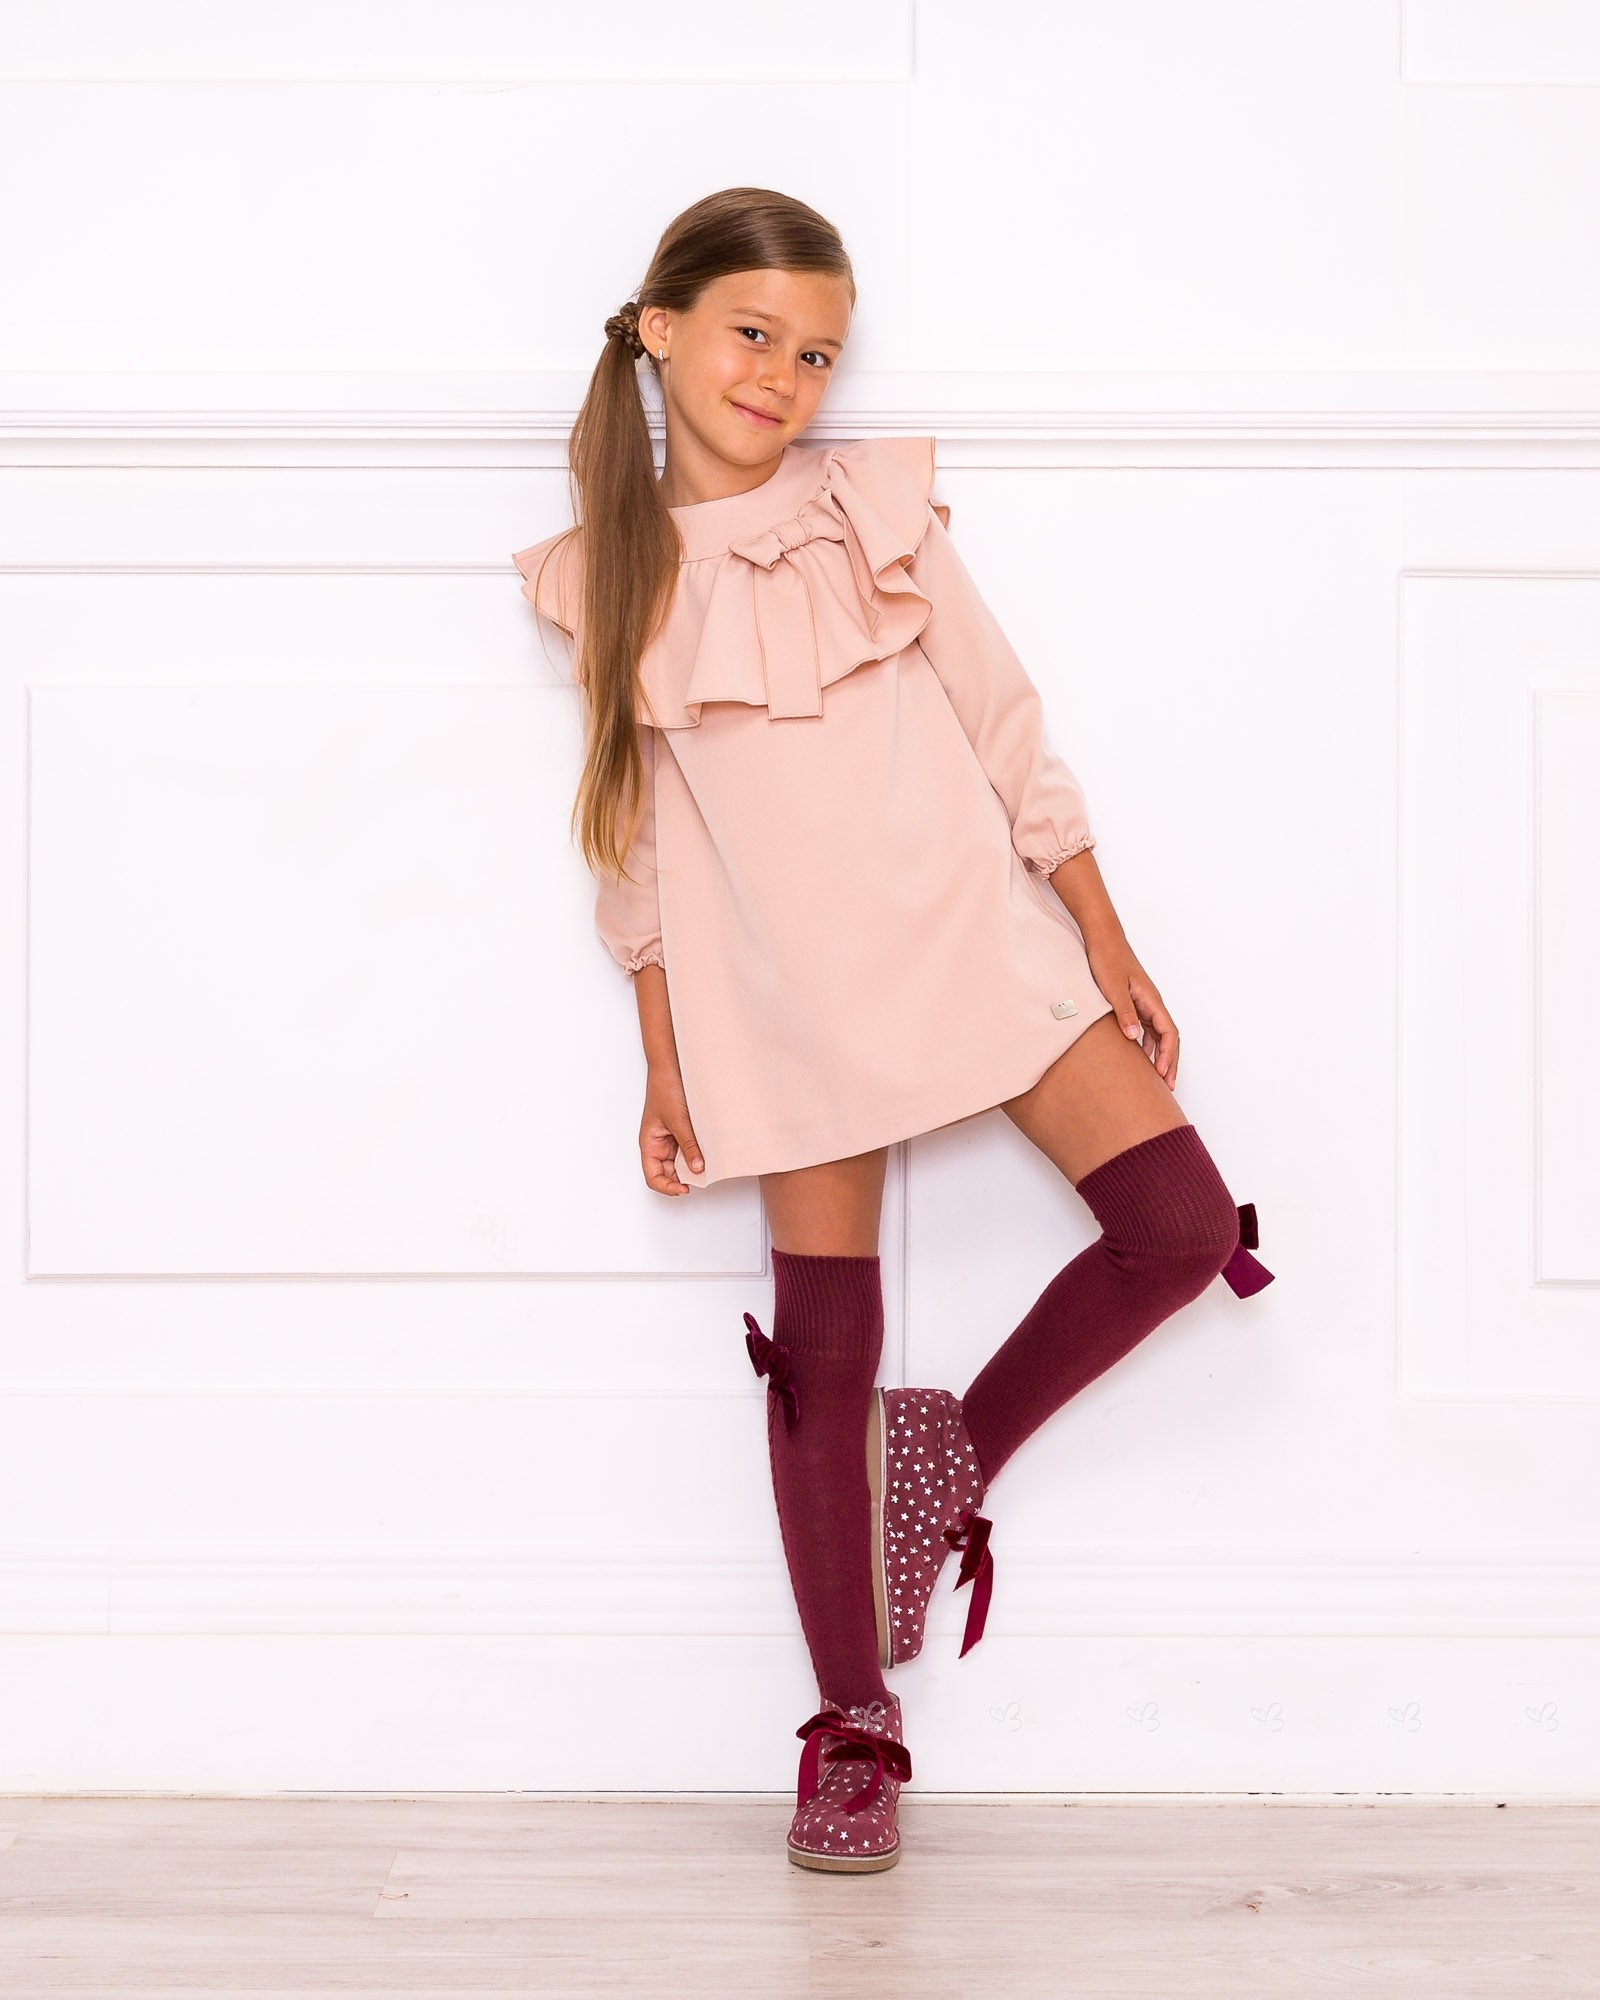 Girls Pale Pink Dress with Ruffle Yoke & Bow Outfit | Missbaby